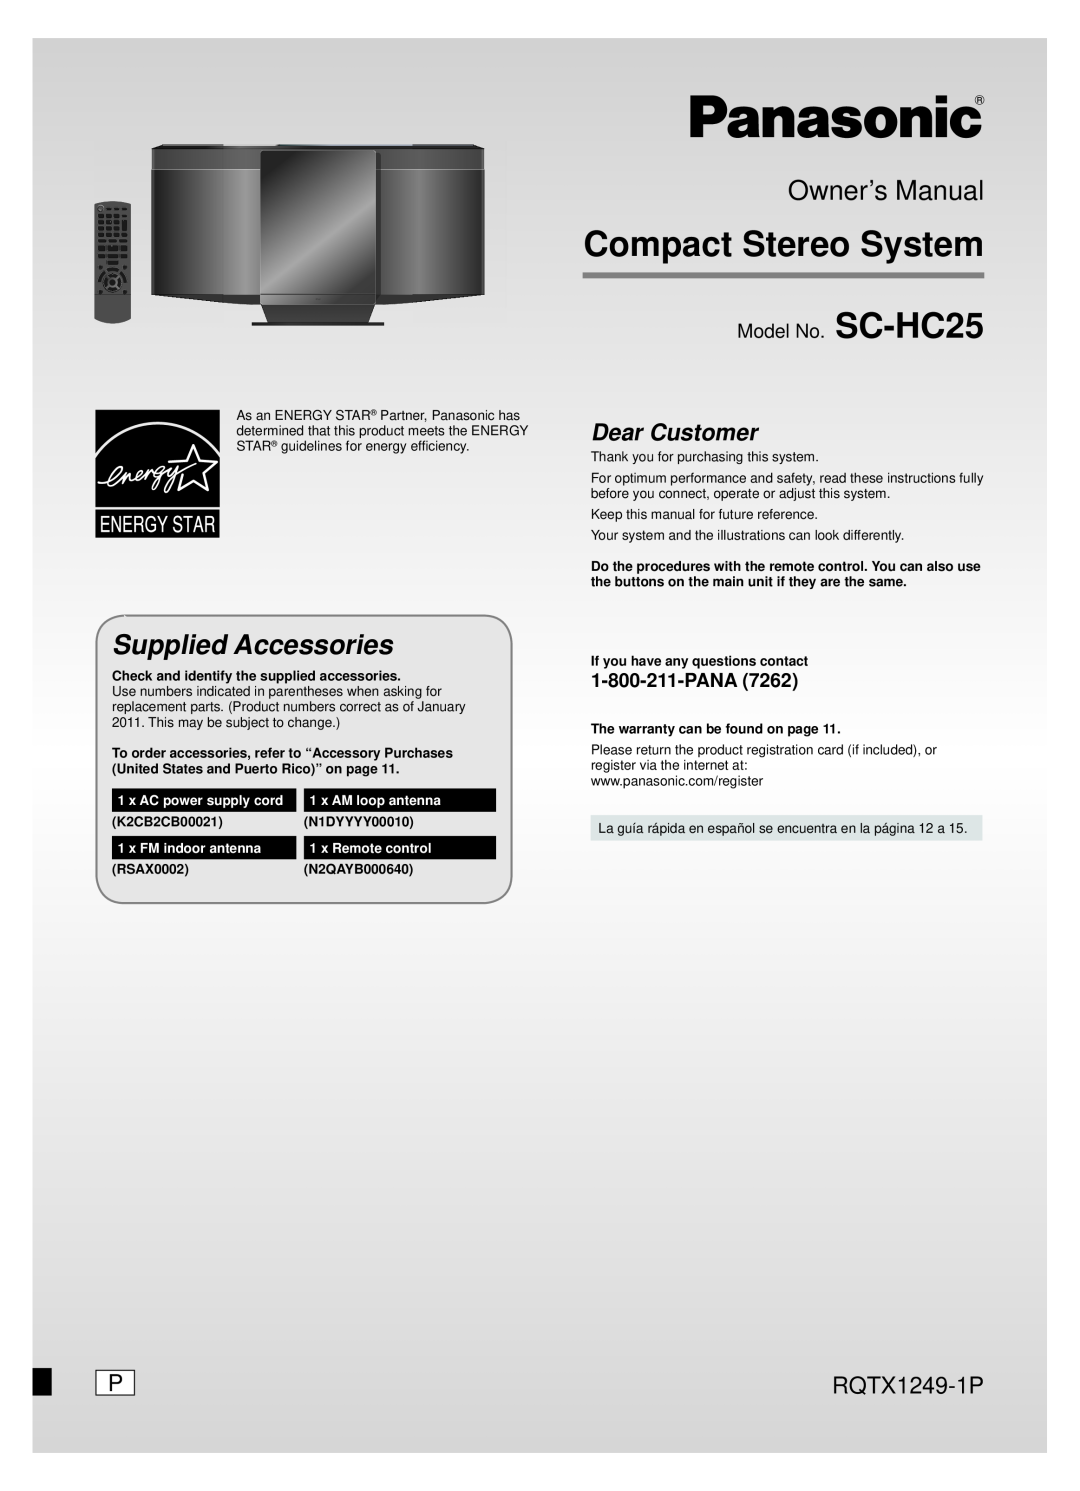 Panasonic owner manual Compact Stereo System, Model No. SC-HC25, Supplied Accessories, RQTX1249-1P, x AM loop antenna 